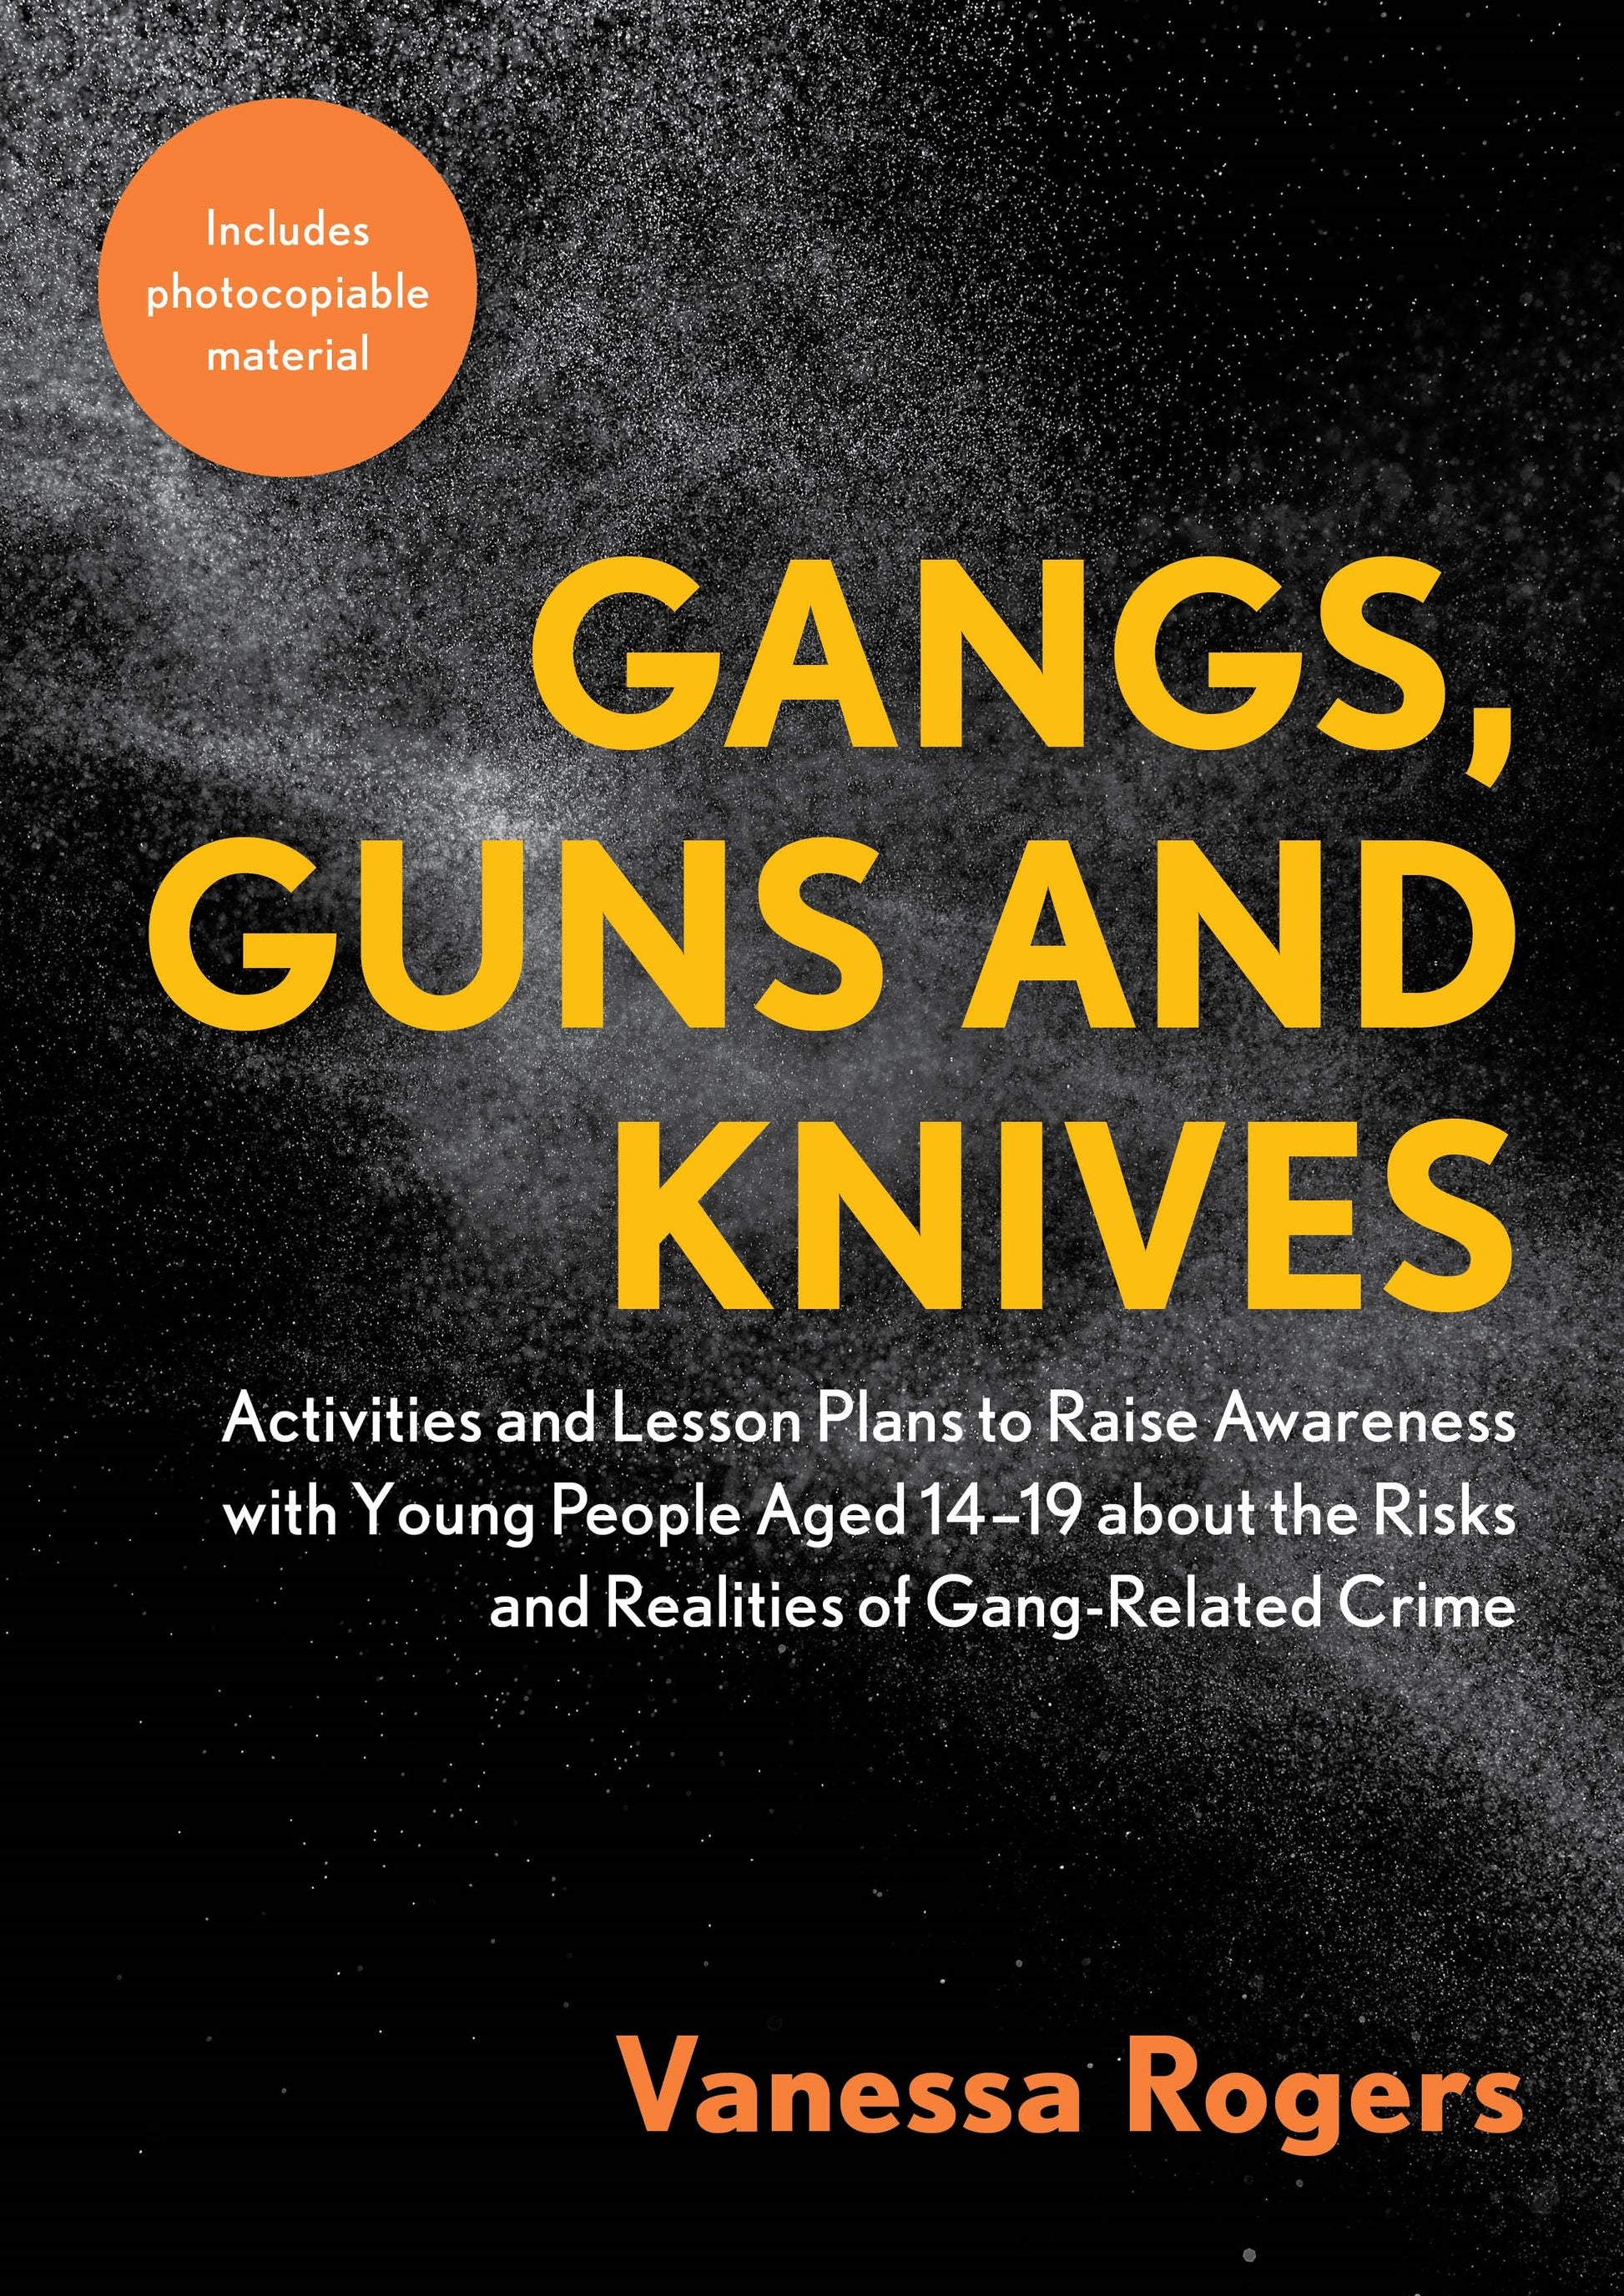 Gangs, Guns and Knives by Vanessa Rogers